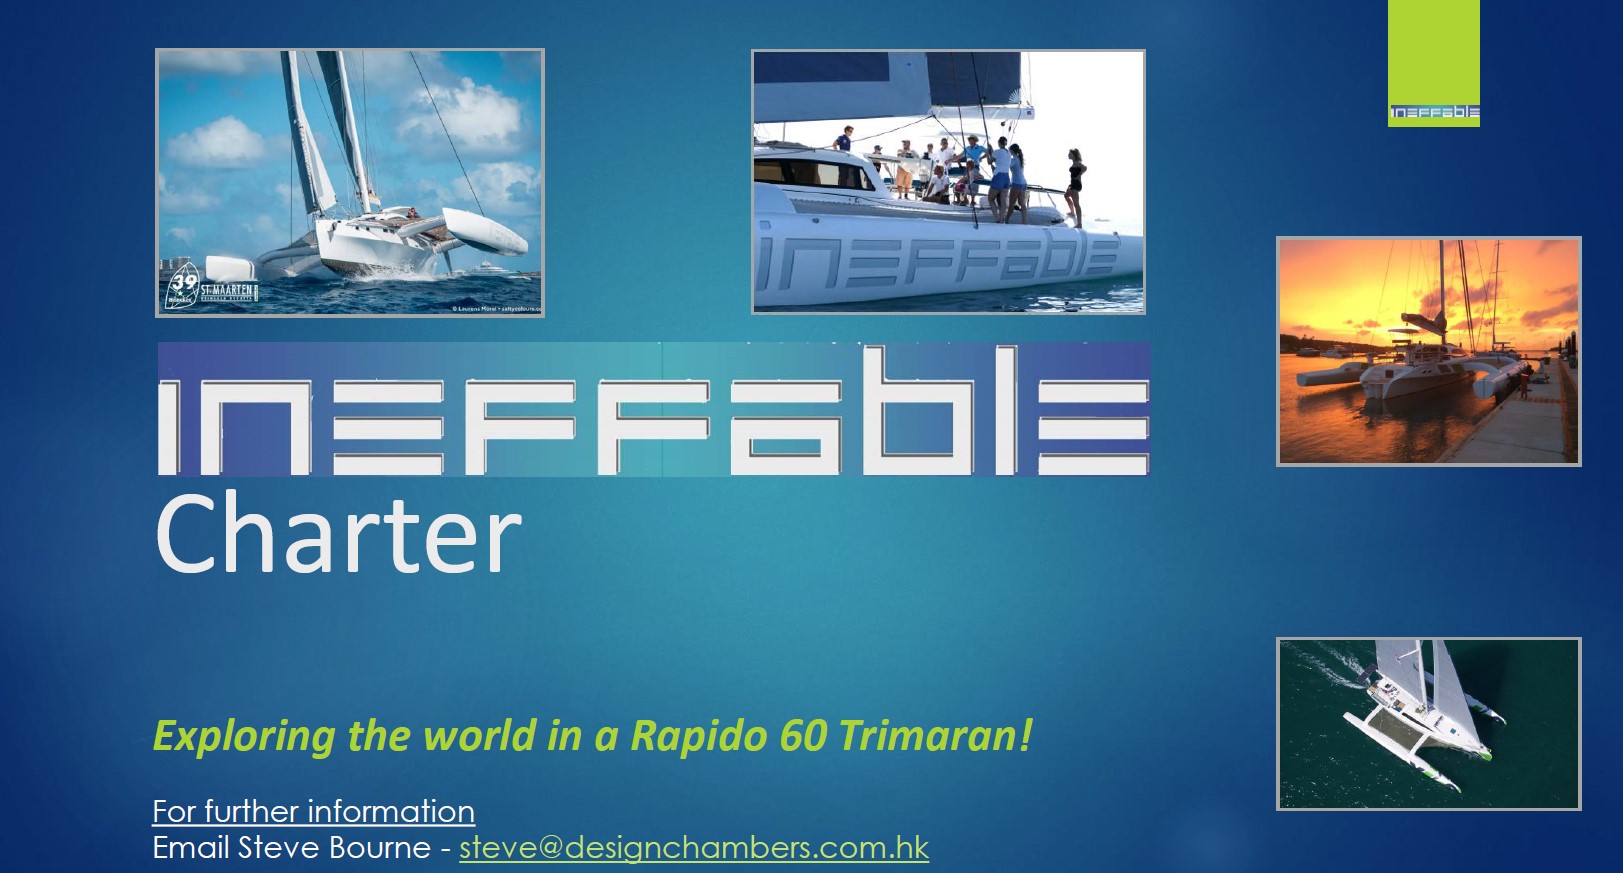 Charter the Ineffable Rapido 60 in 2020!